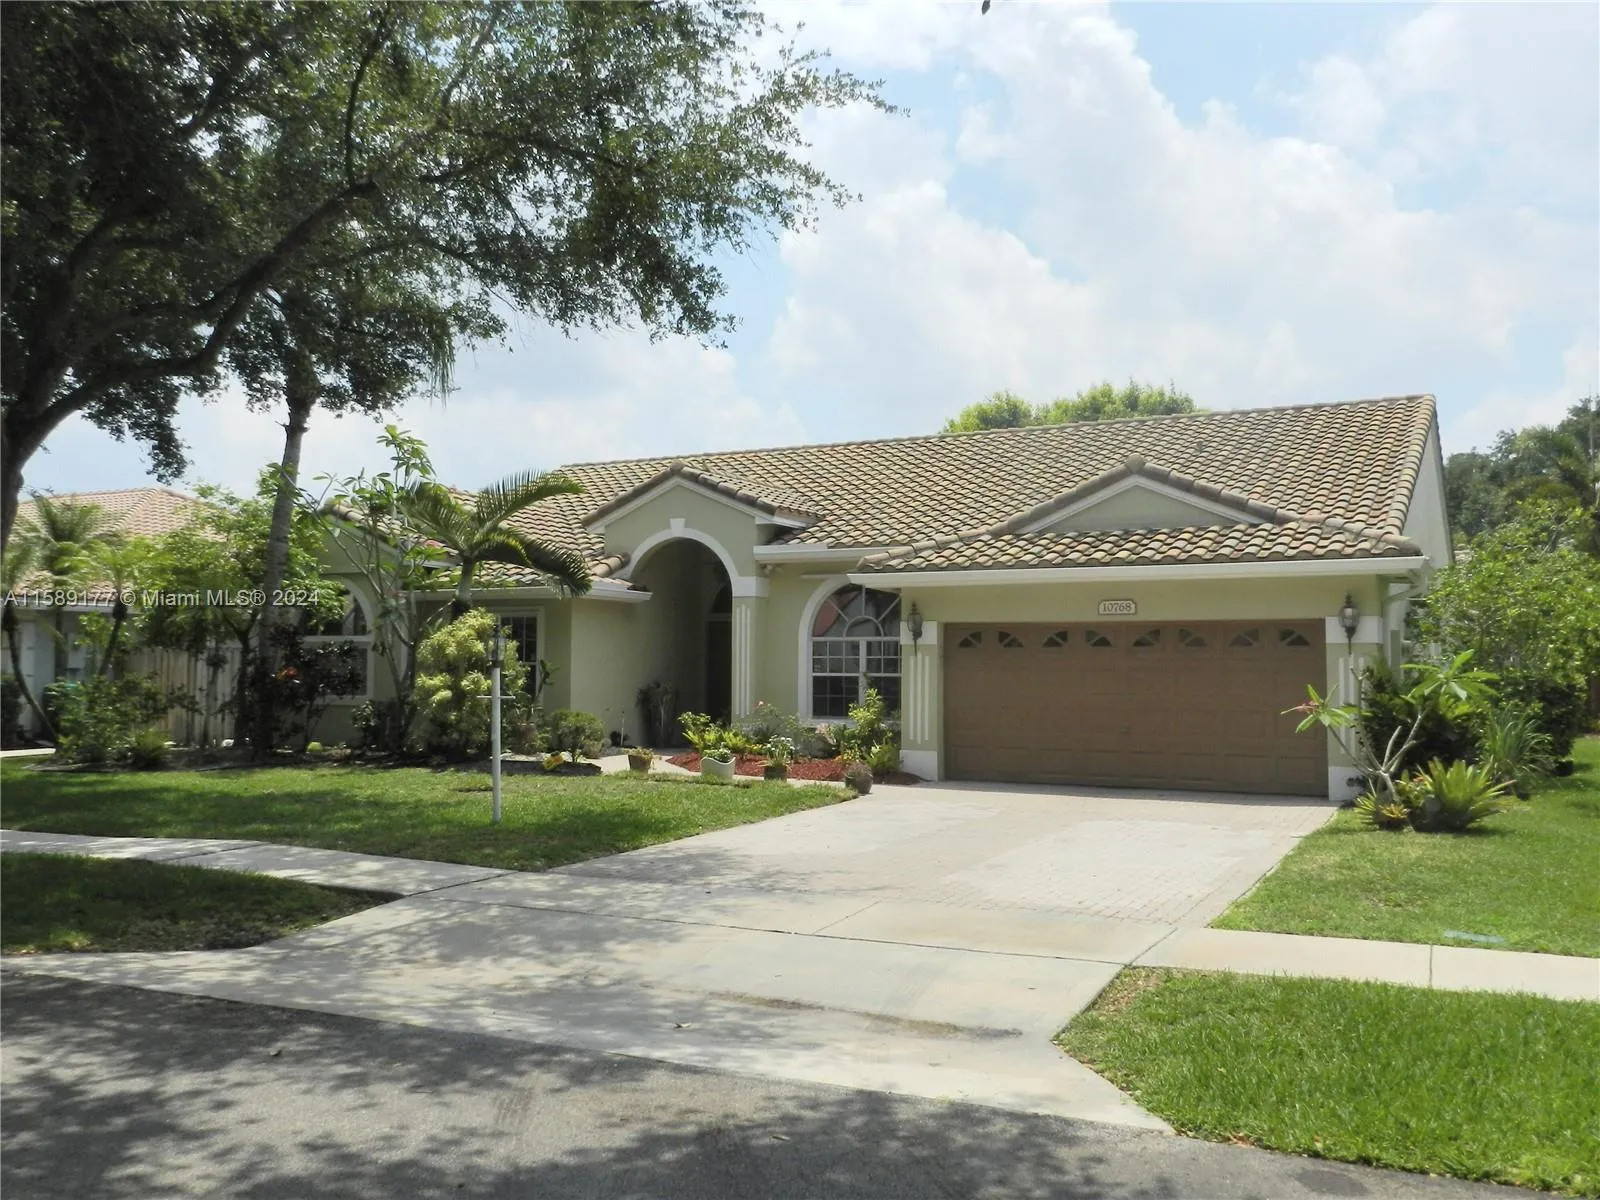 Fantastic curb appeal with 2 car garage and ample driveway